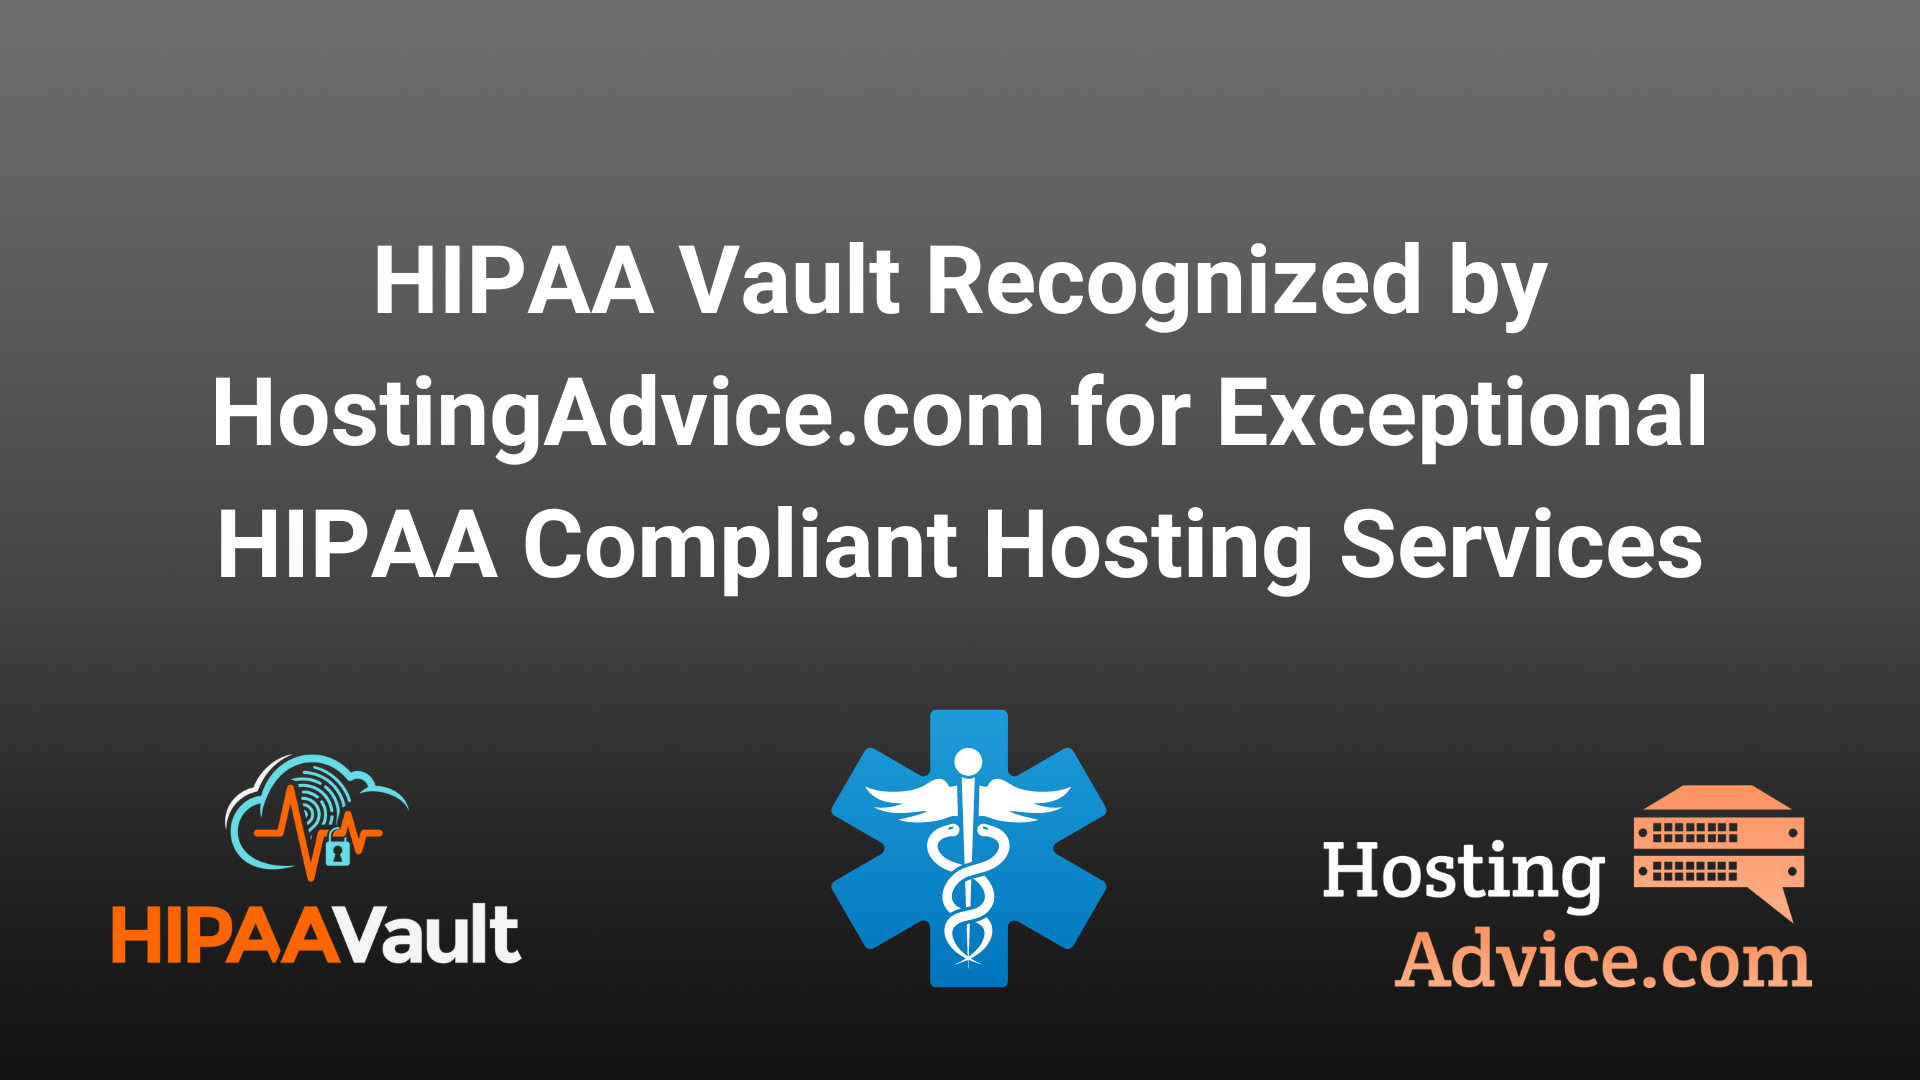 HIPAA Vault Recognized by HostingAdvice.com for Exceptional HIPAA Compliant Hosting Services